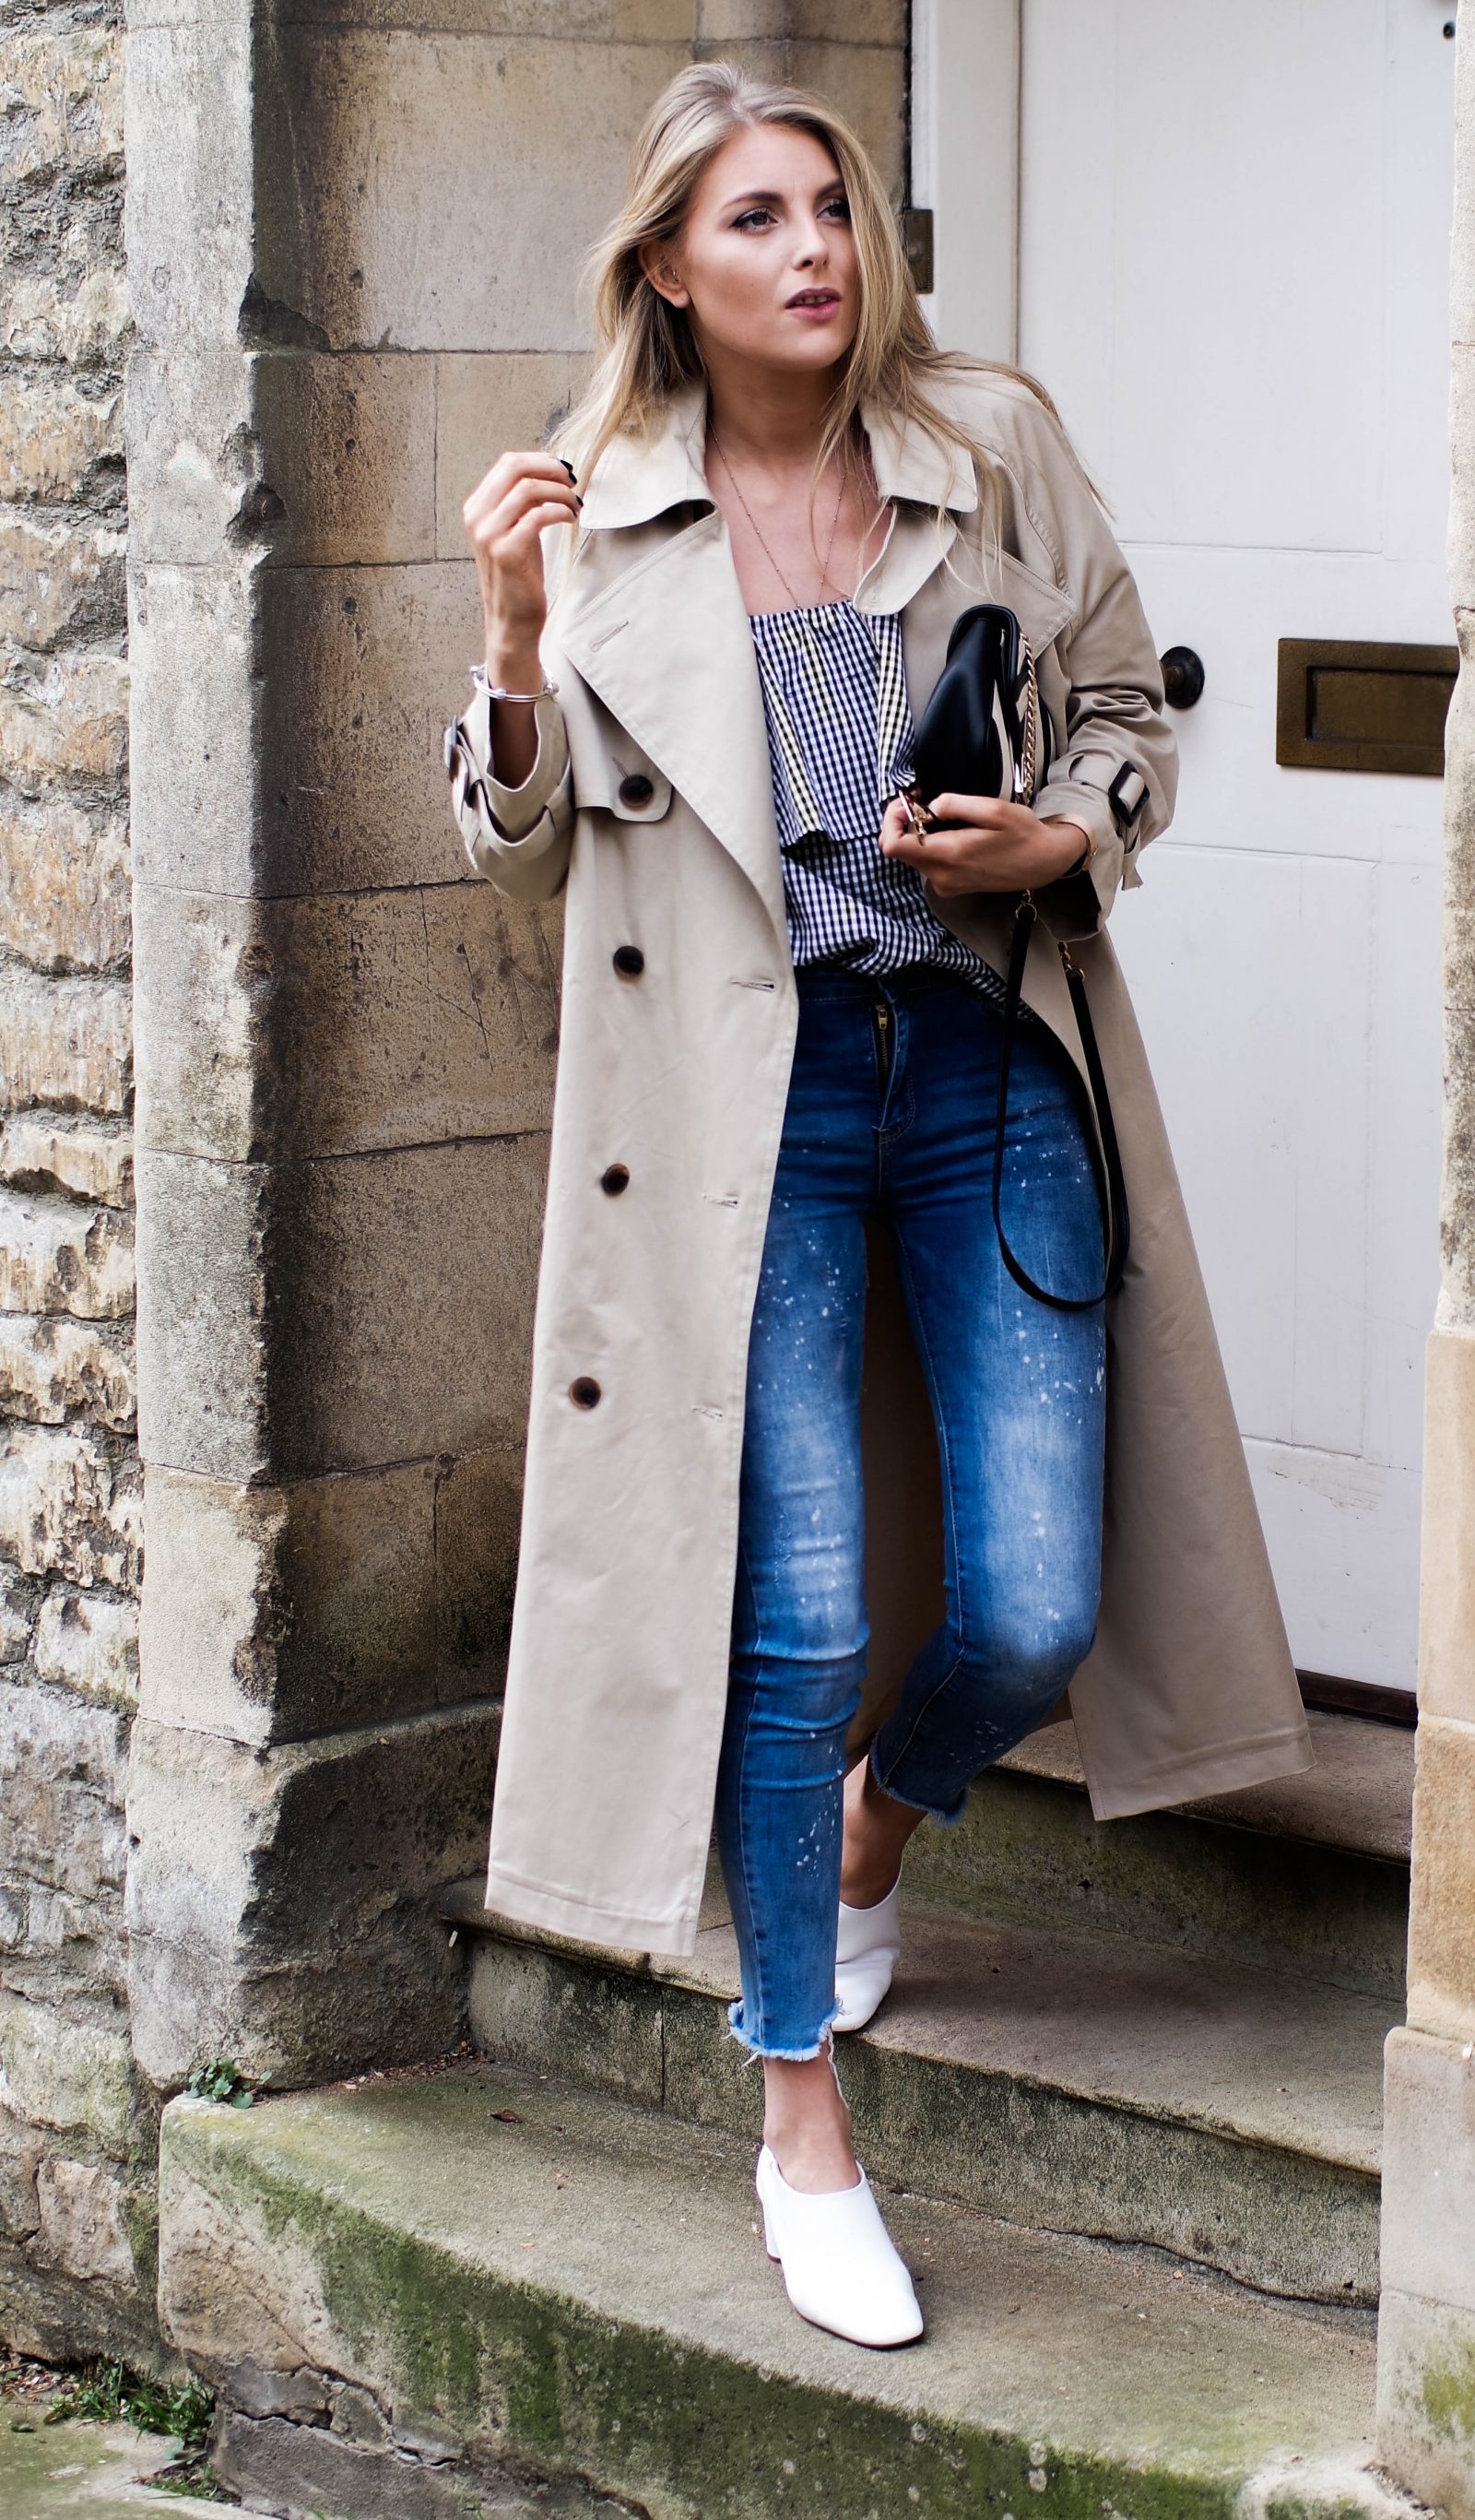 The Spring Wardrobe Staple Every Woman Should Own - Next Trench Coat